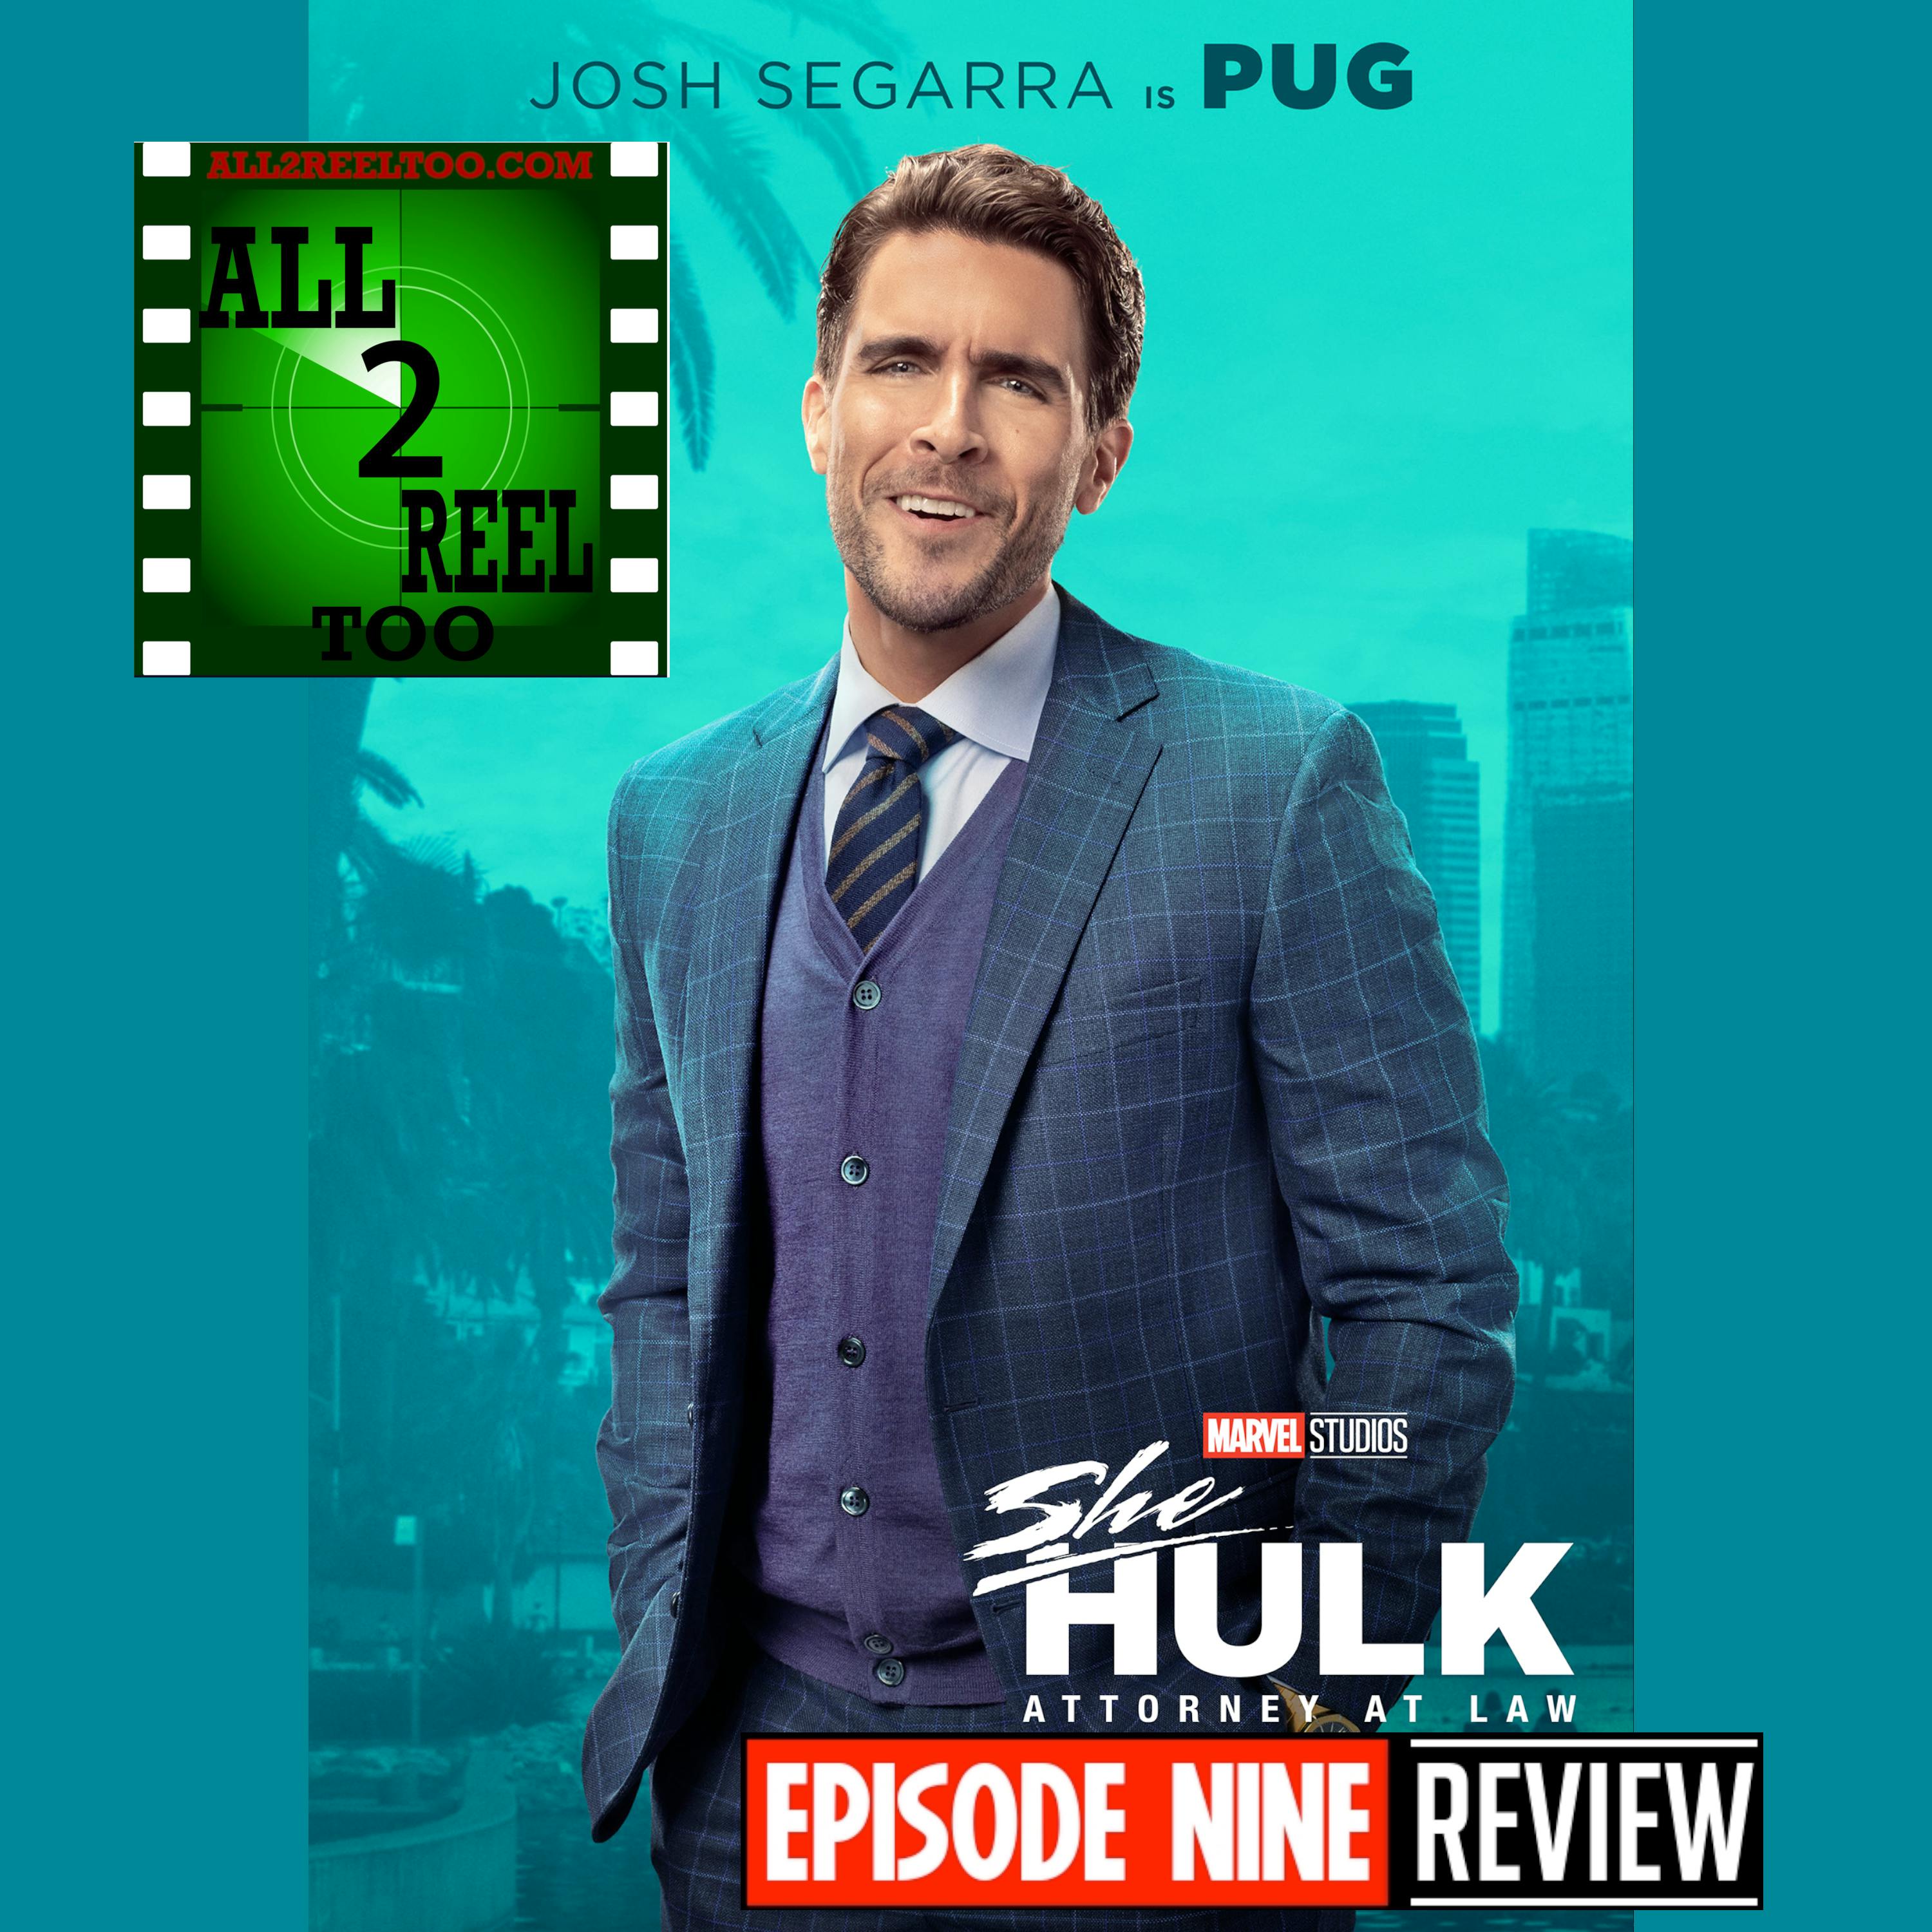 She-Hulk: Attorney at Law - EPISODE 9 REVIEW Image